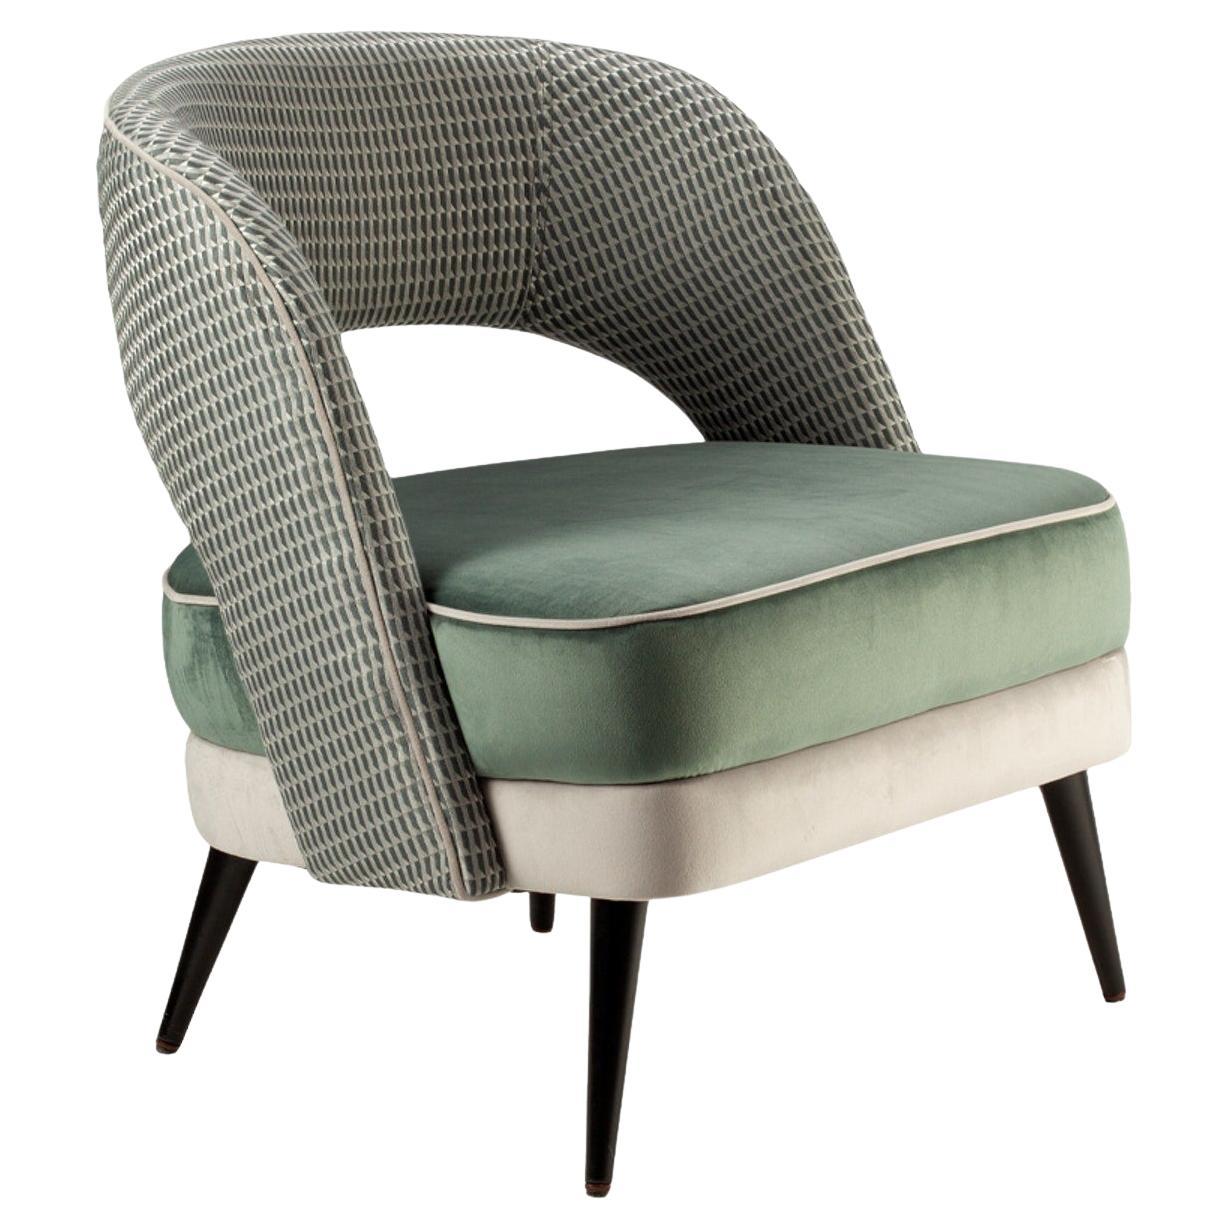 Ava Armchair Soft Green Seat and Patterned Olive Green Backrest